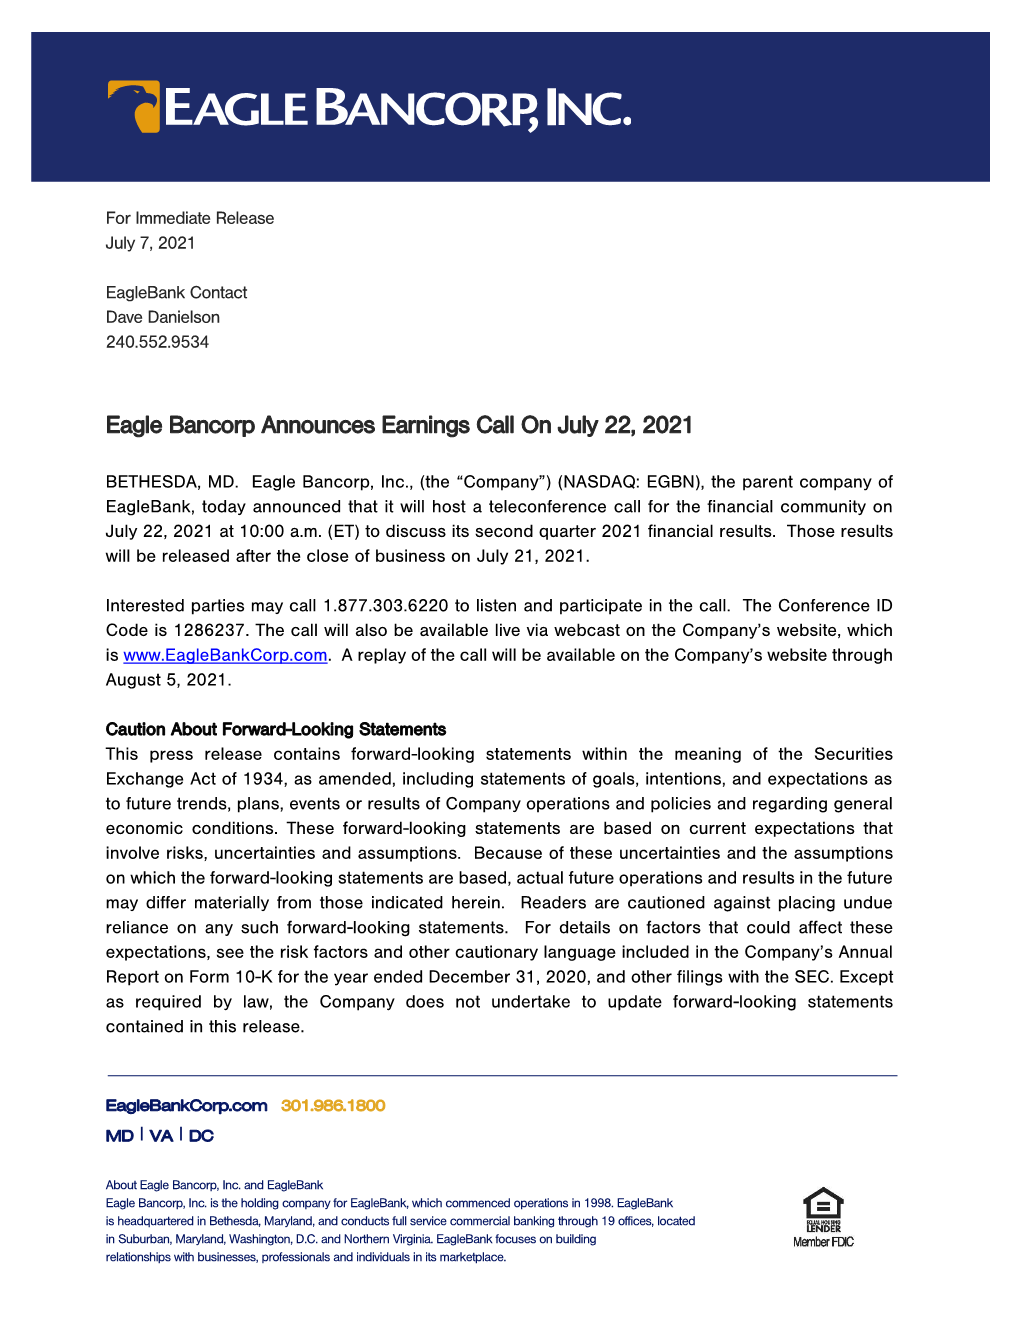 Eagle Bancorp Announces Earnings Call on July 22, 2021